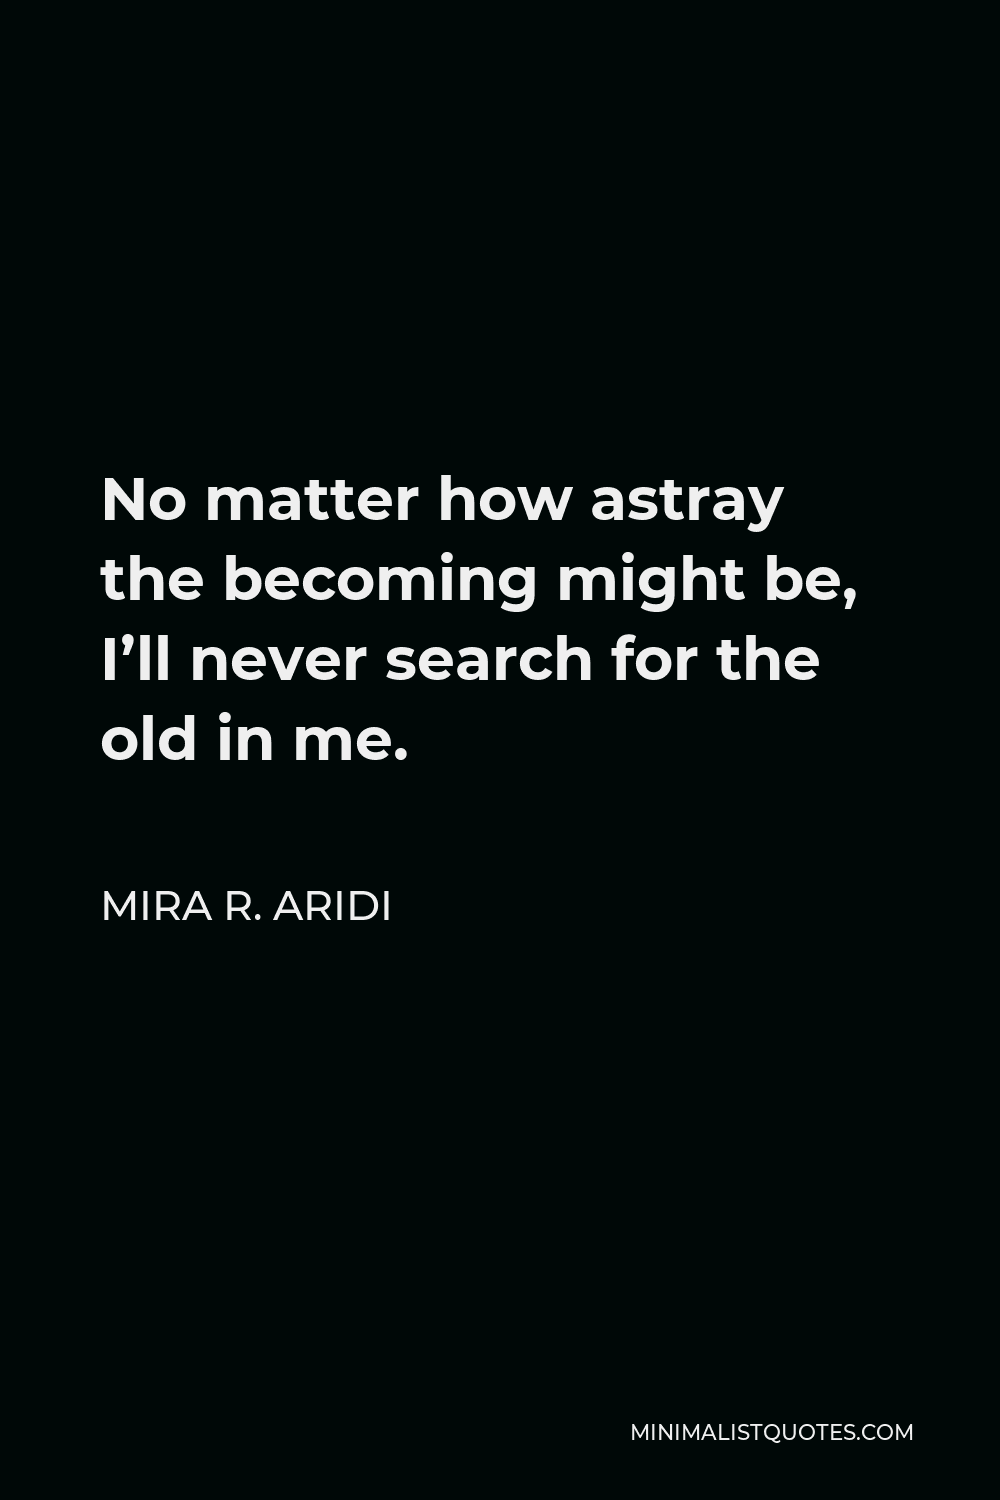 Mira R. Aridi Quote - No matter how astray the becoming might be, I’ll never search for the old in me.